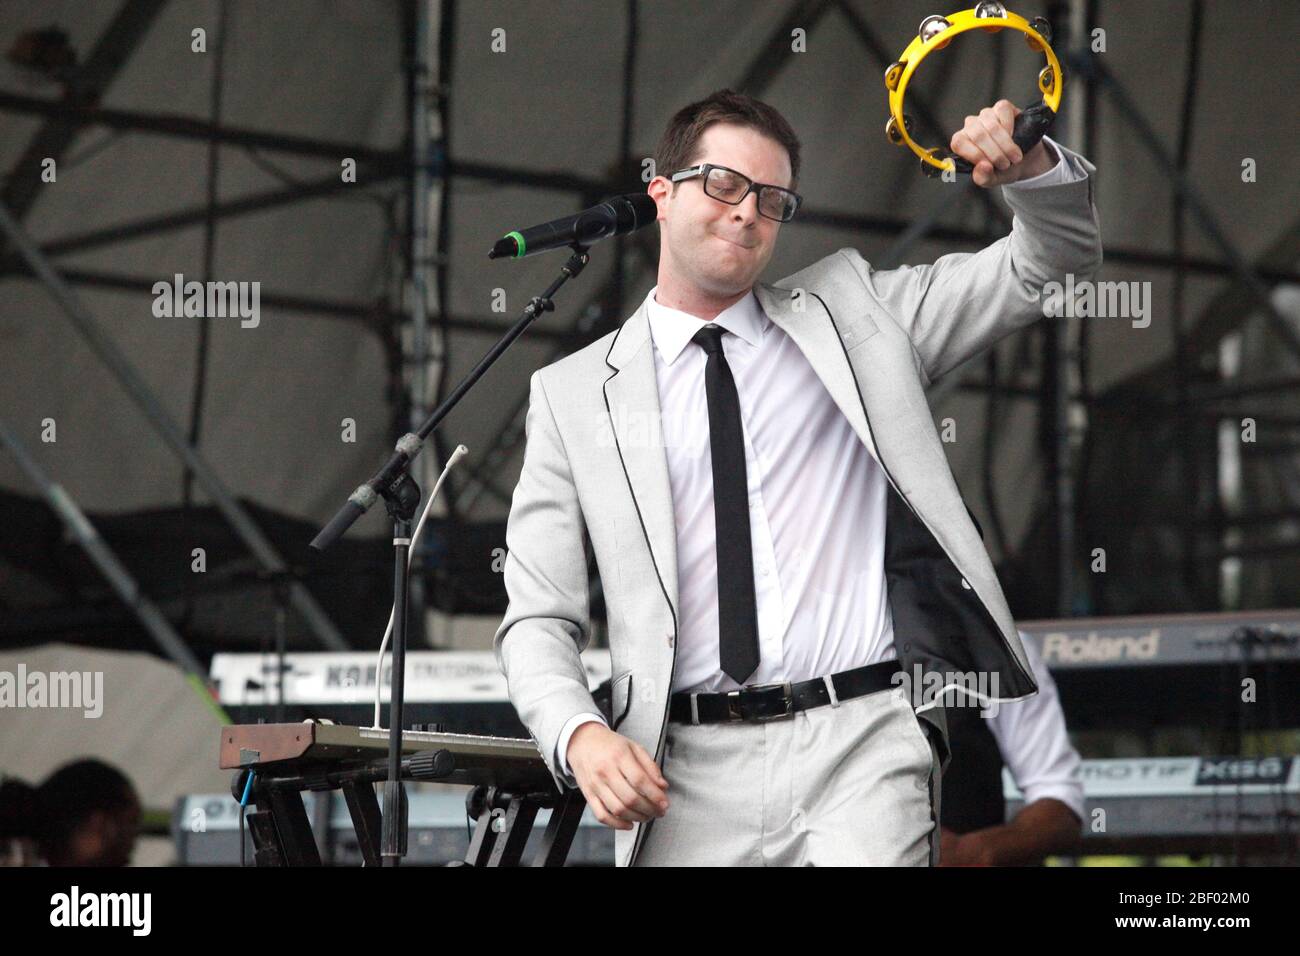 Mayer Hawthorne performs at the 3rd Annual Roots Picnic at Festival Pier at PennÕs Landing in Philadelphia on June 5, 2010  Credit: Scott Weiner/MediaPunch Stock Photo